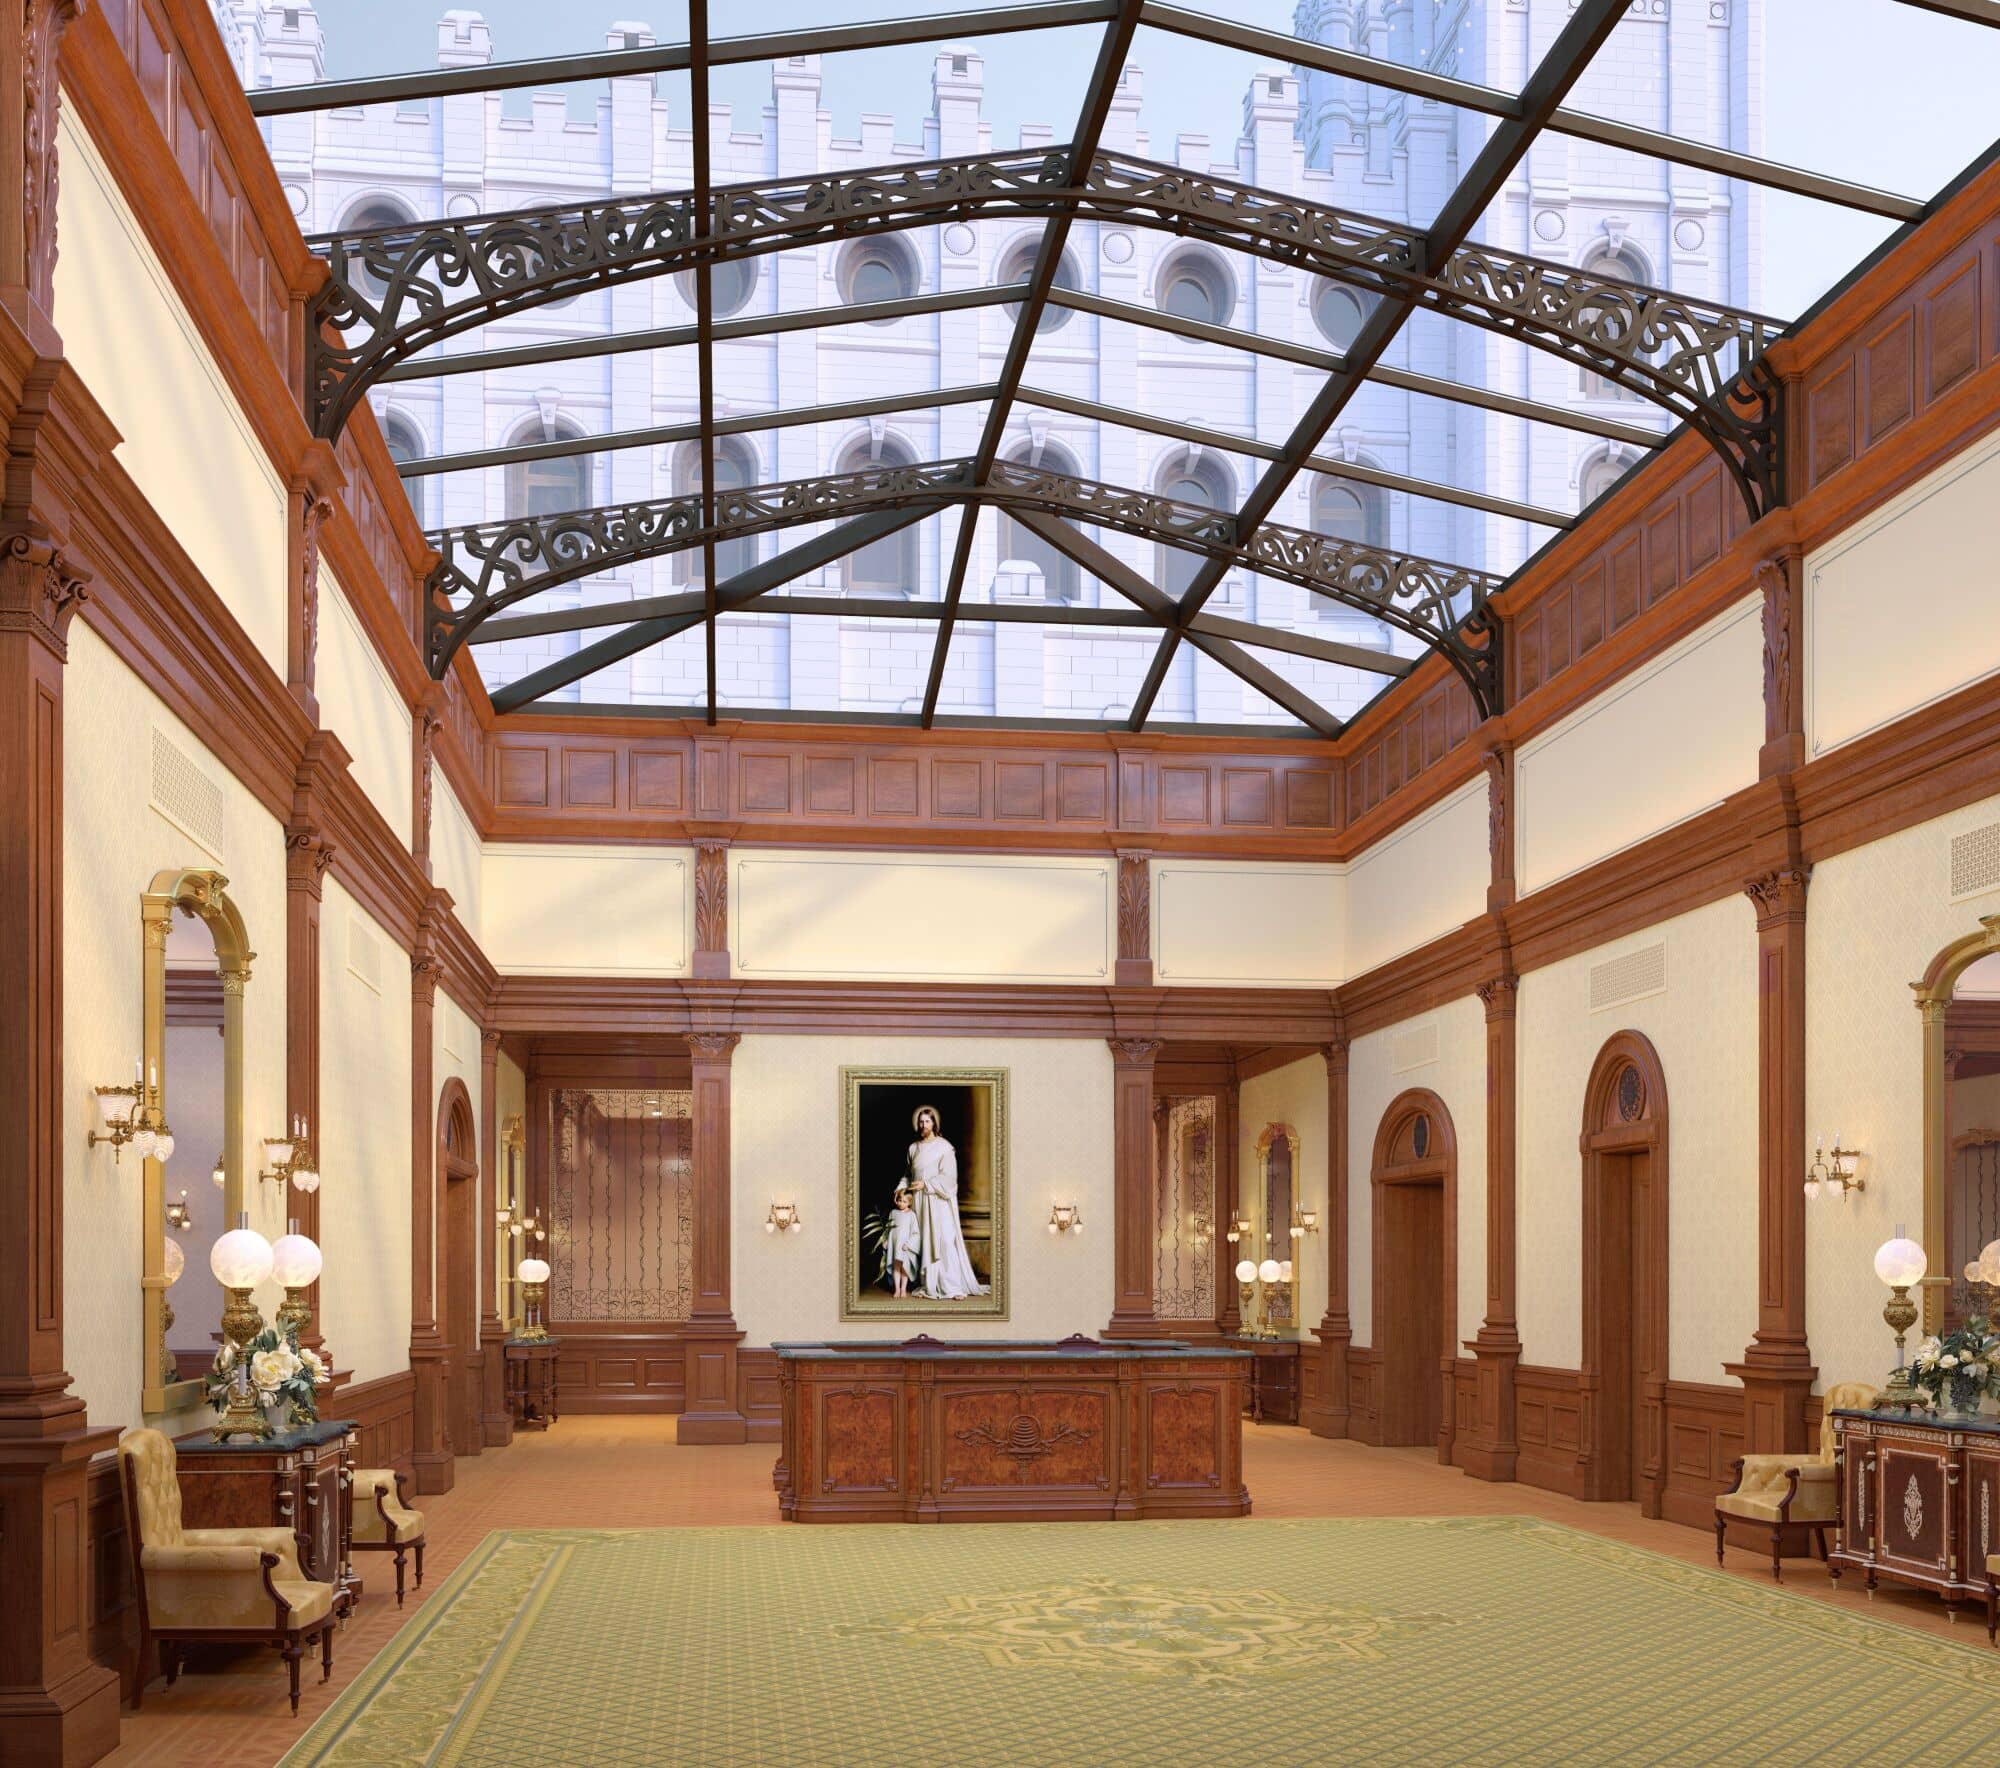 A large room with a wooden desk in the center, a painting of Christ behind it and a large skylight above it.